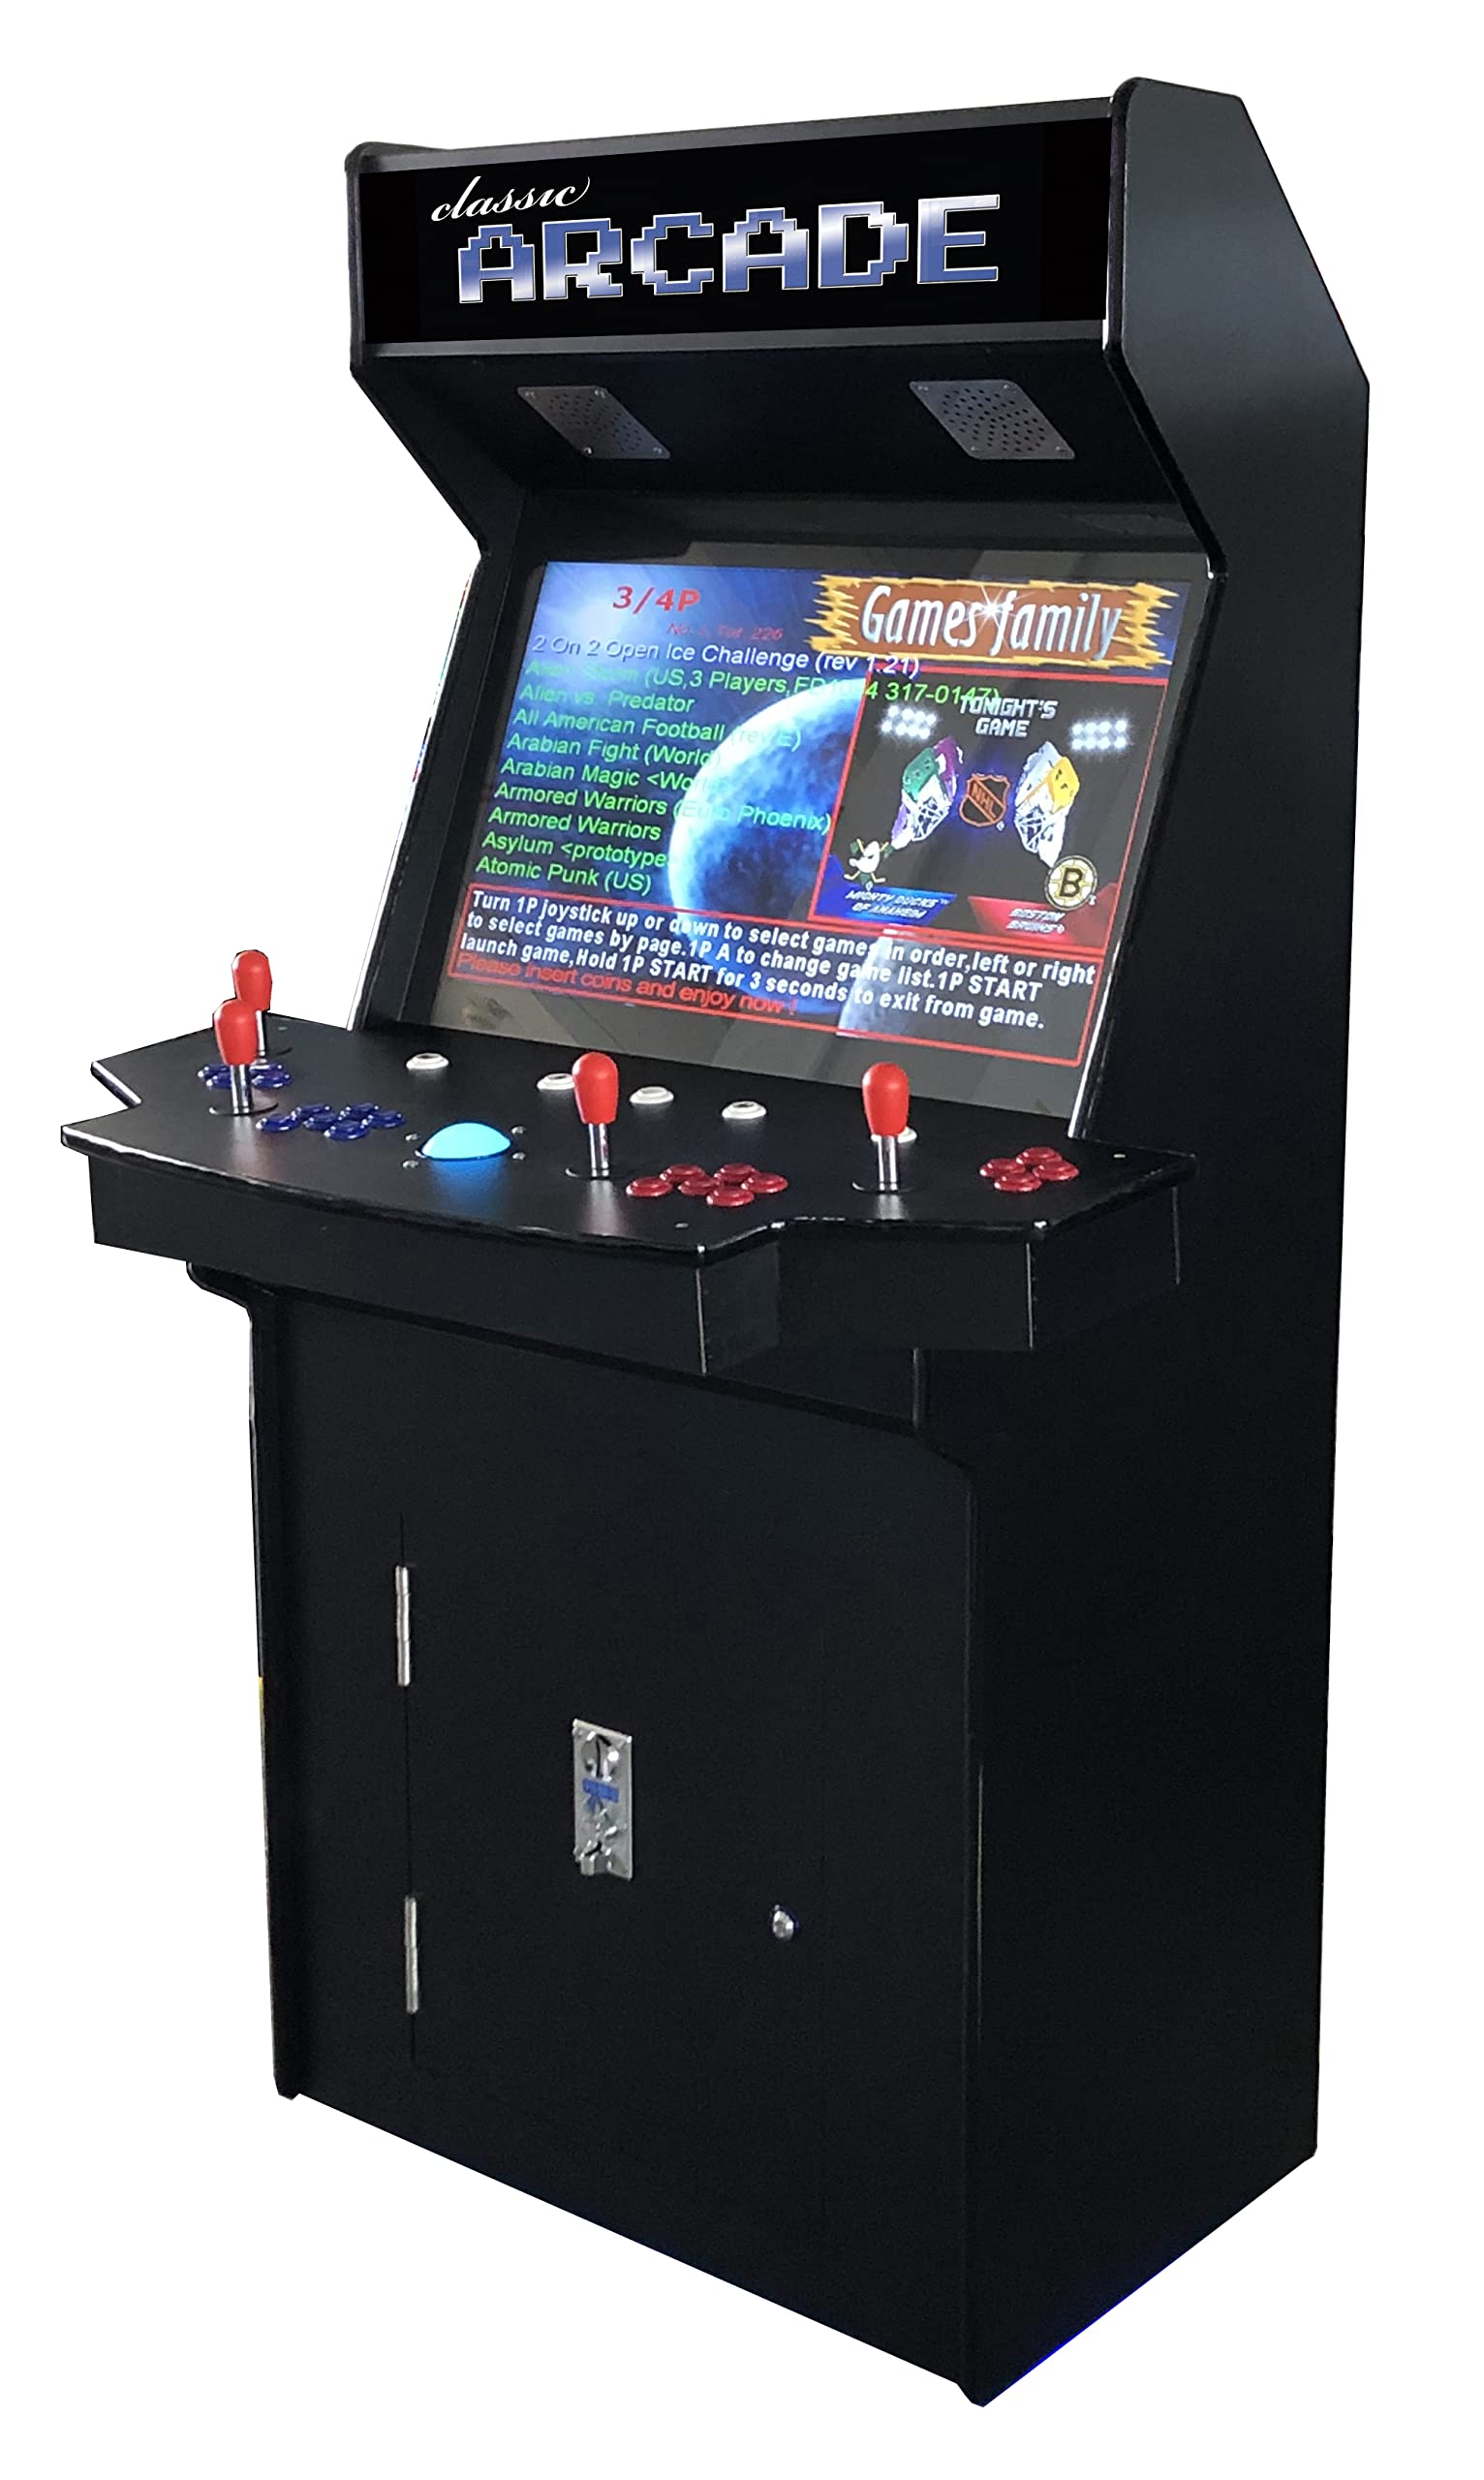 Top Us Video Arcades Full Size Commercial Grade Upright Standup Arcade Machine 4 Player 4600 Classic Games 32 inch Screen Black